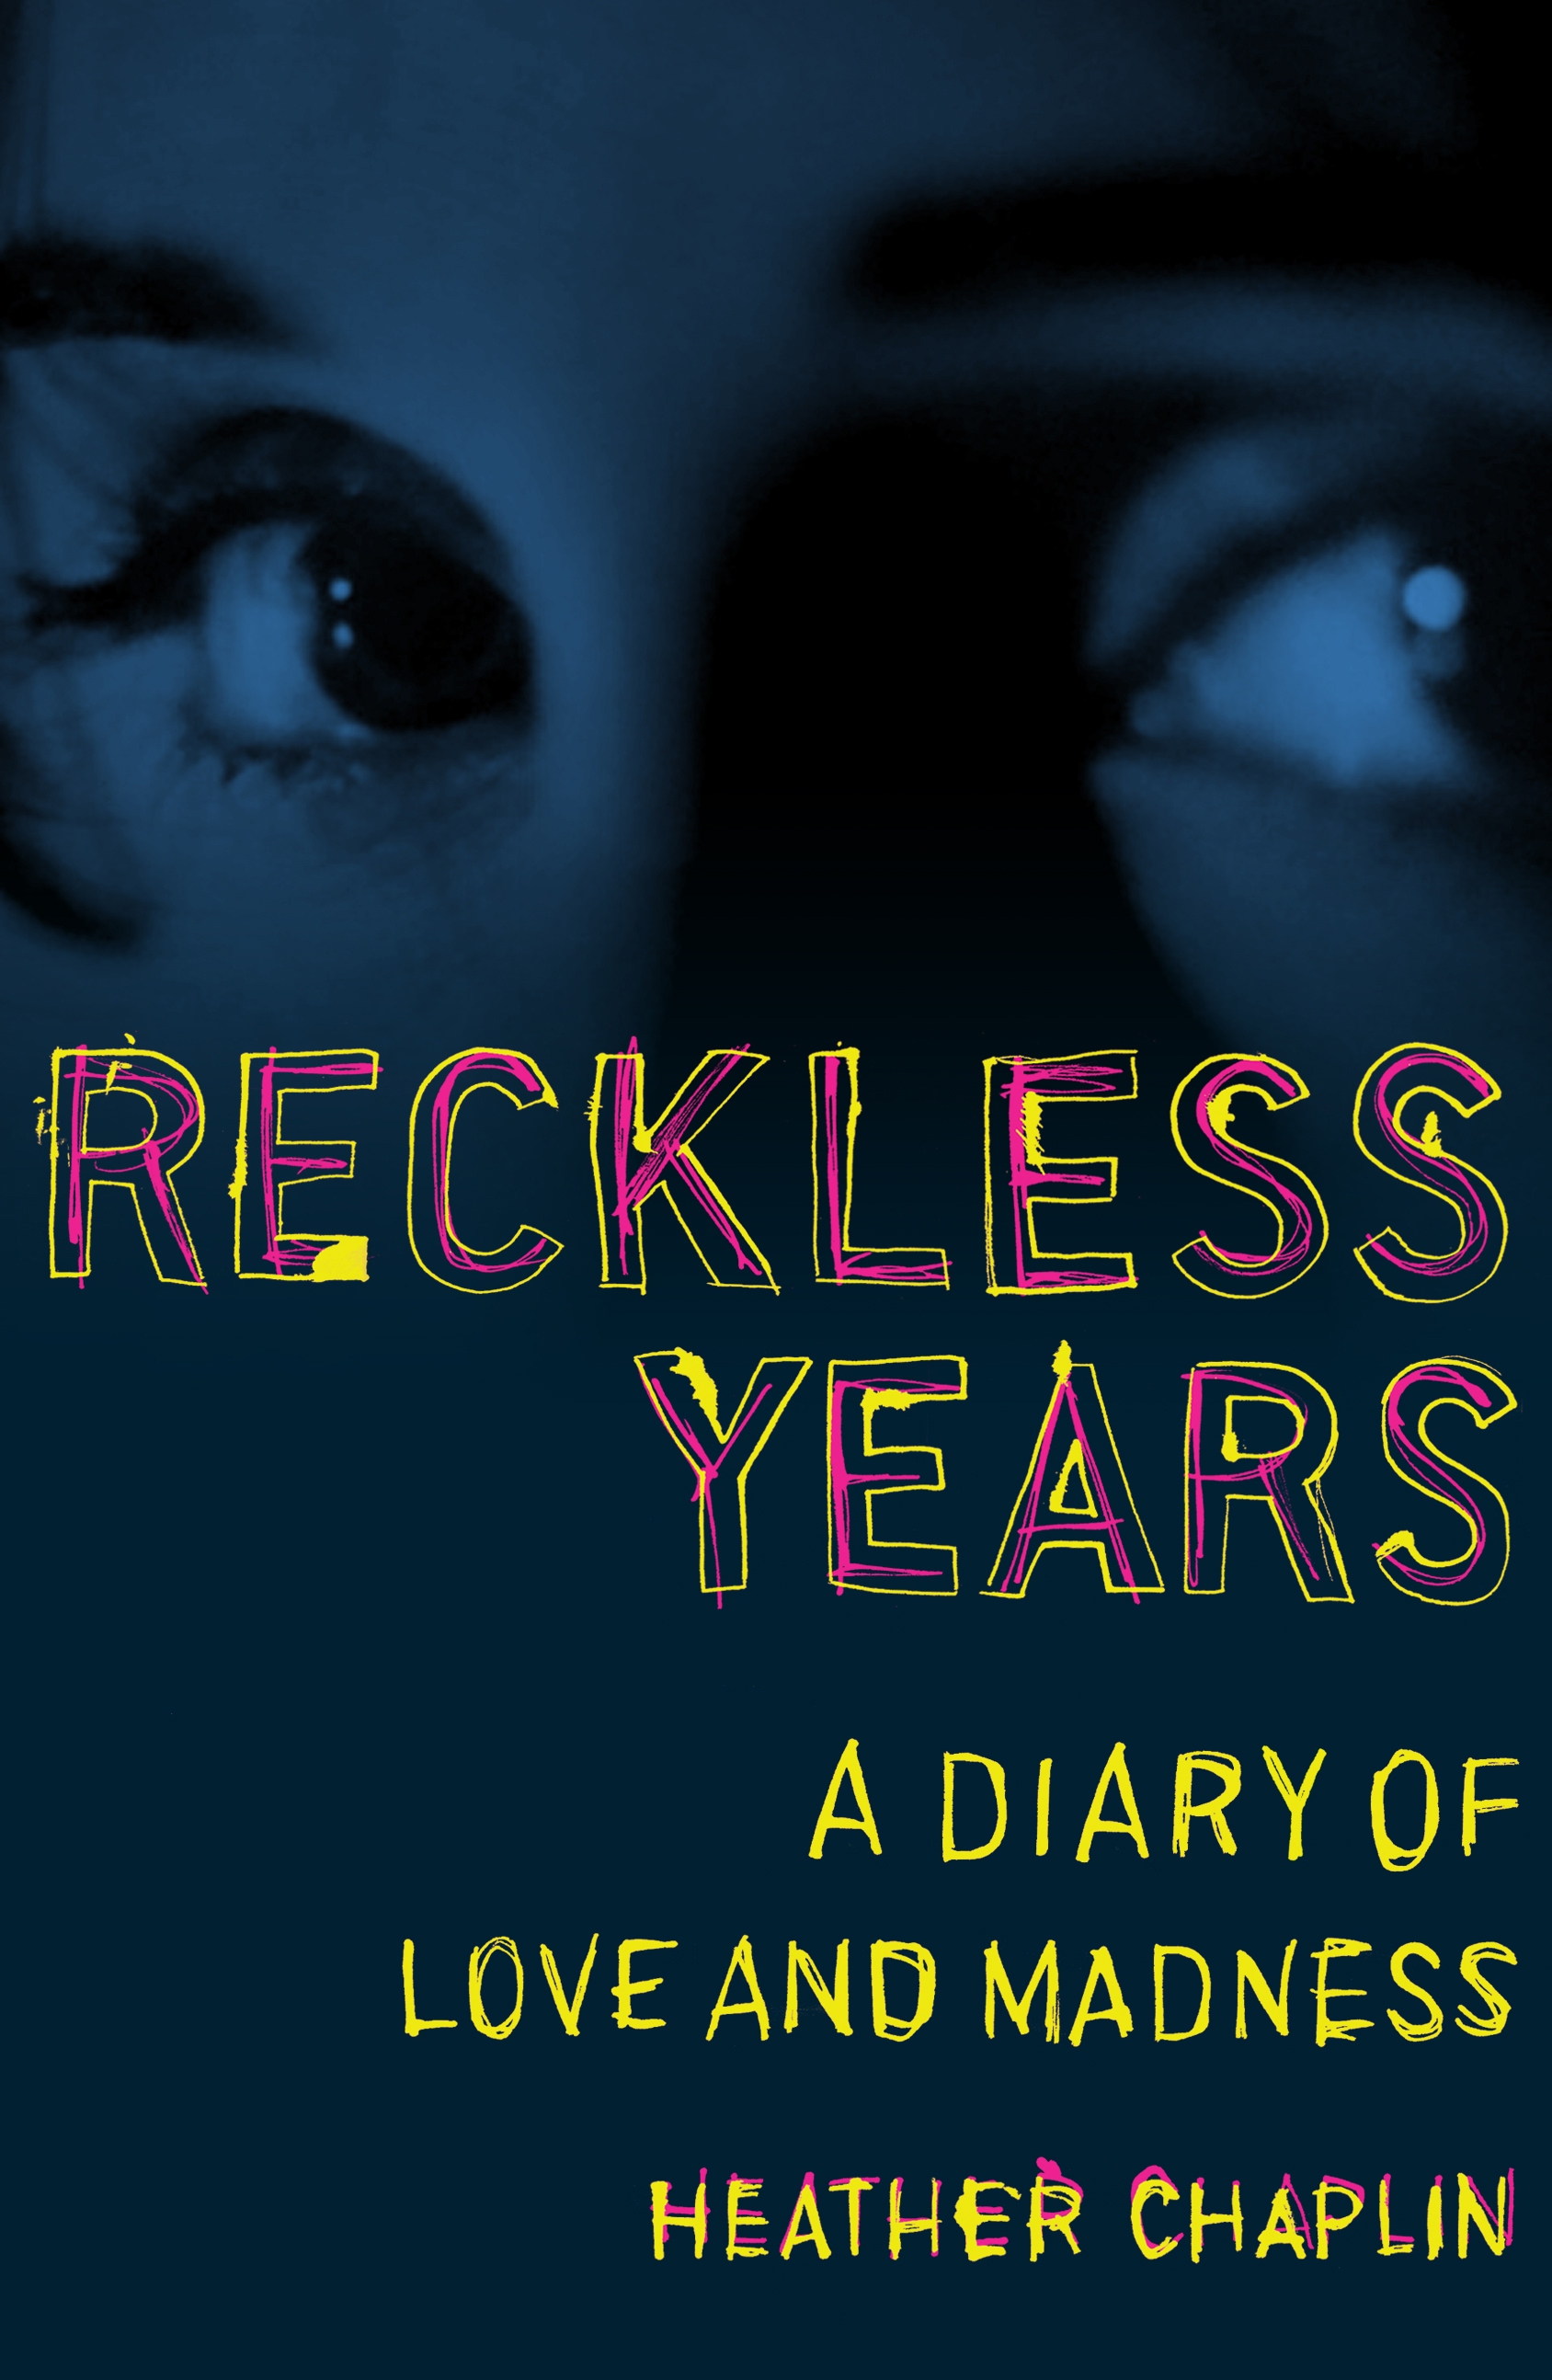 Book Launch: Reckless Years: A Diary of Love and Madness by Heather Chaplin